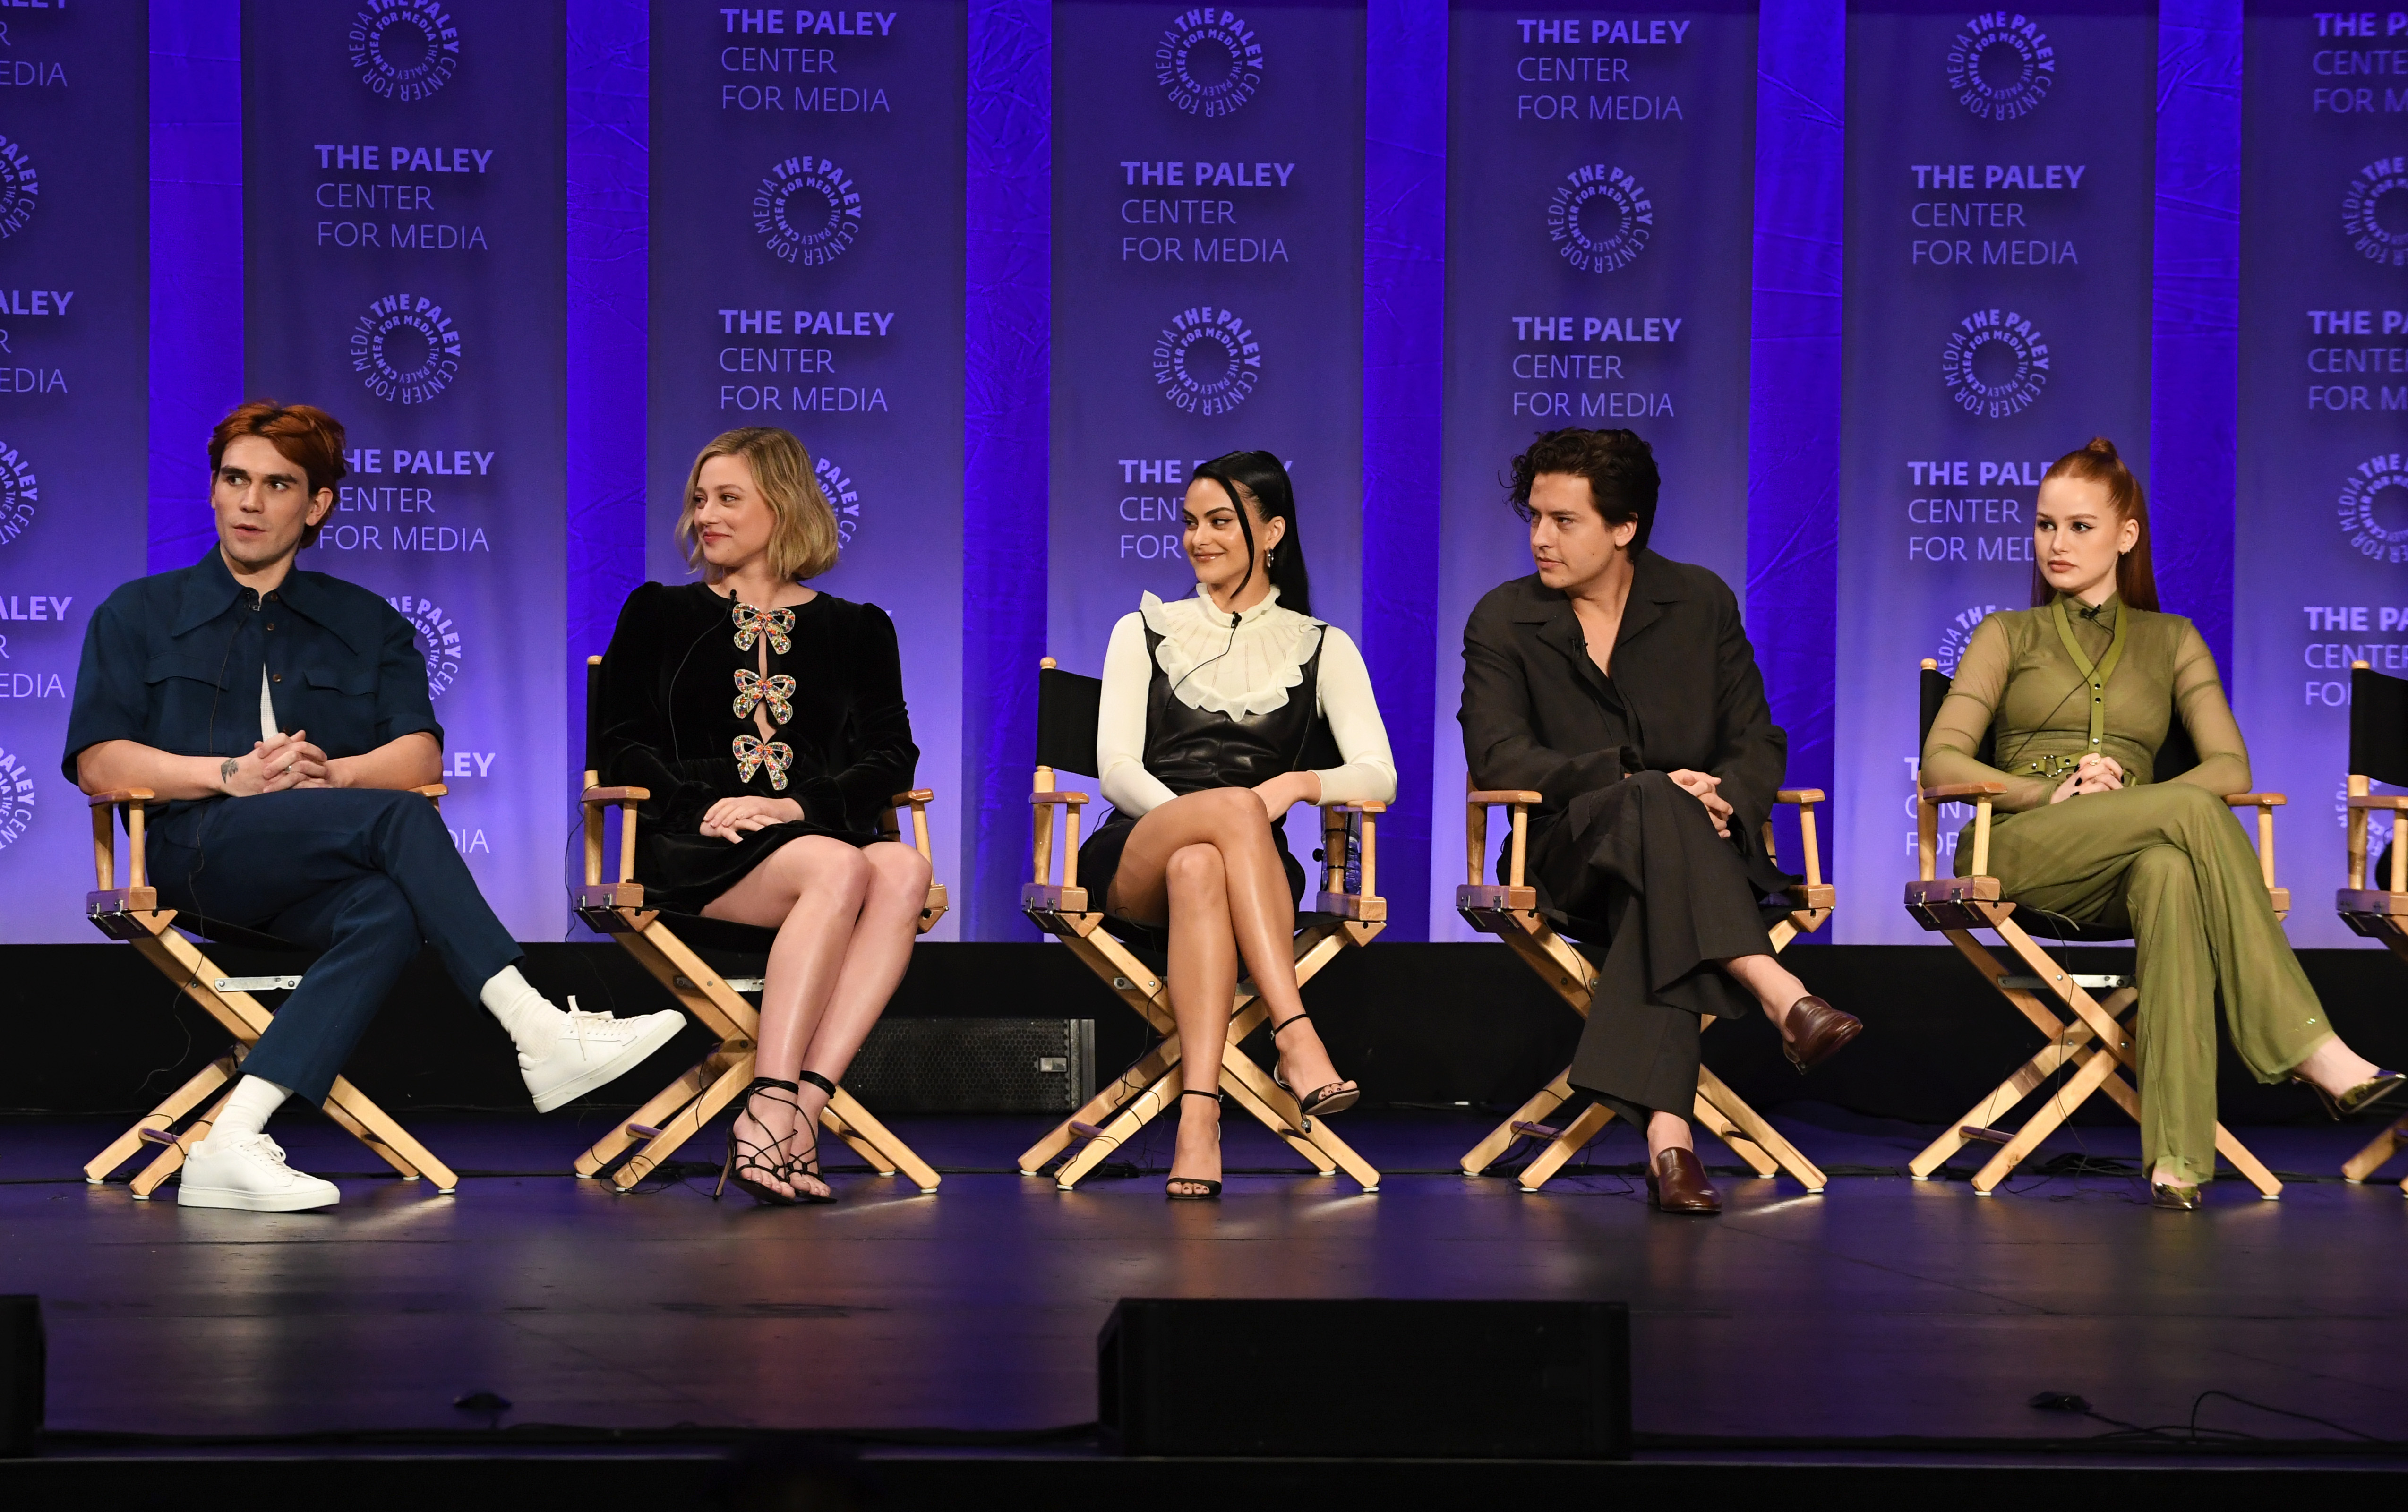 Lili Reinhart, Camila Mendes, Cole Sprouse and Madelaine Petsch attend the 39th Annual PaleyFest LA